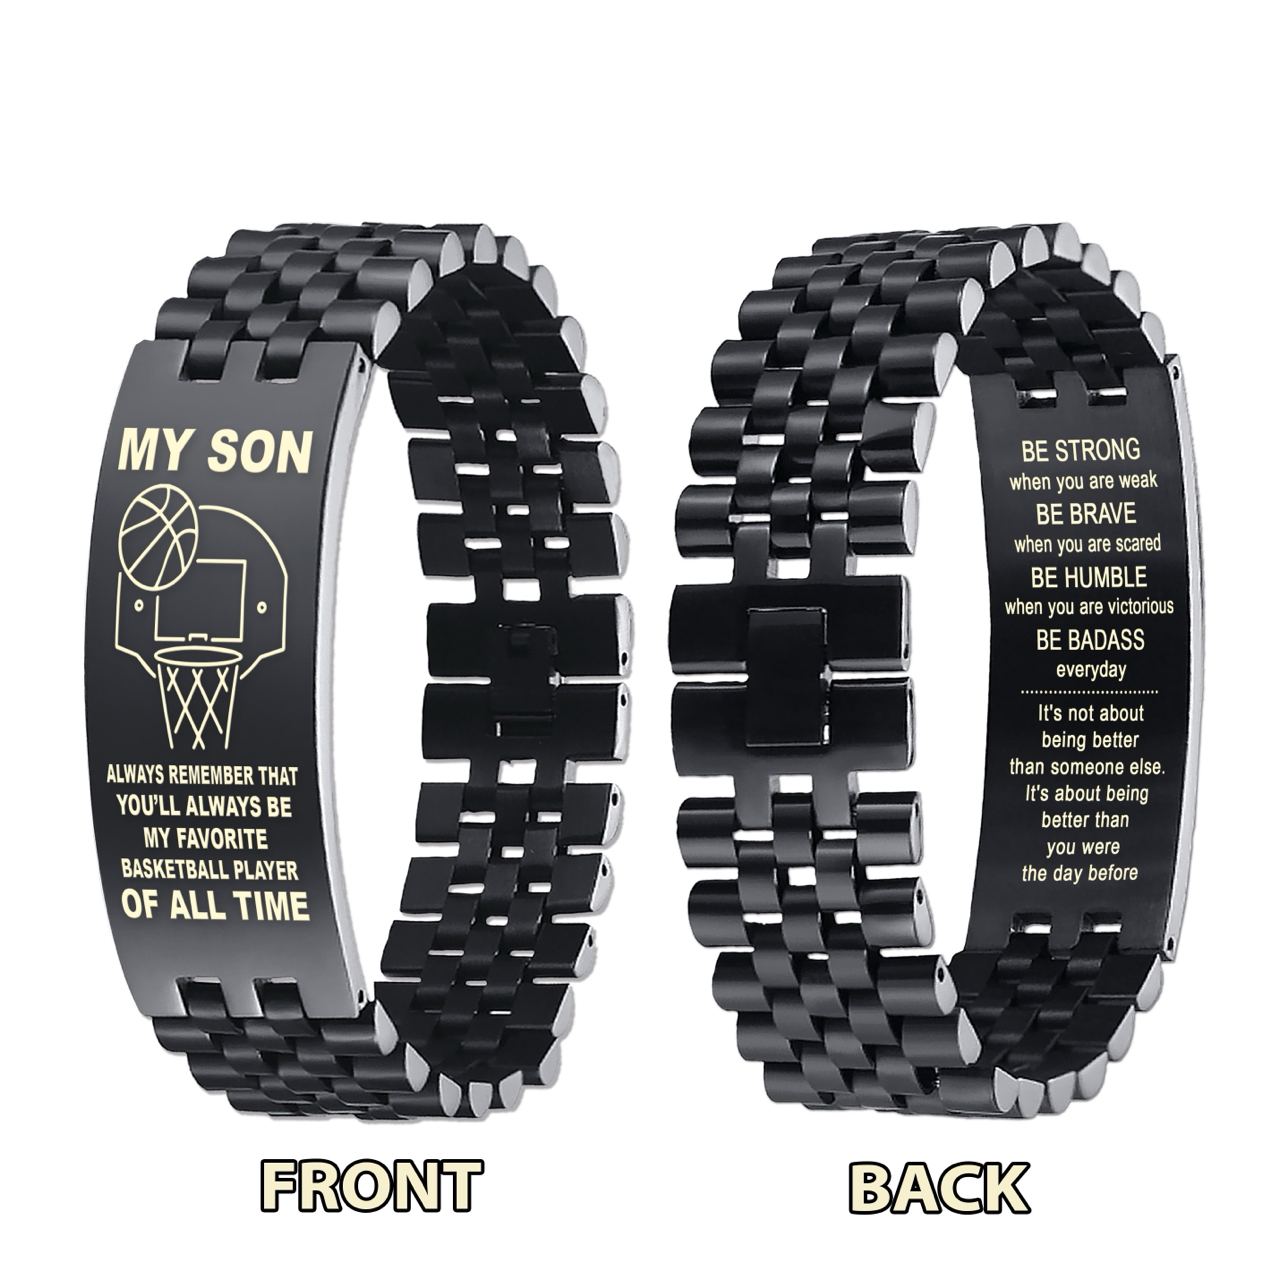 DS2 Customizable basketball bracelet, gifts from dad mom to son- I hope you believe in yourself